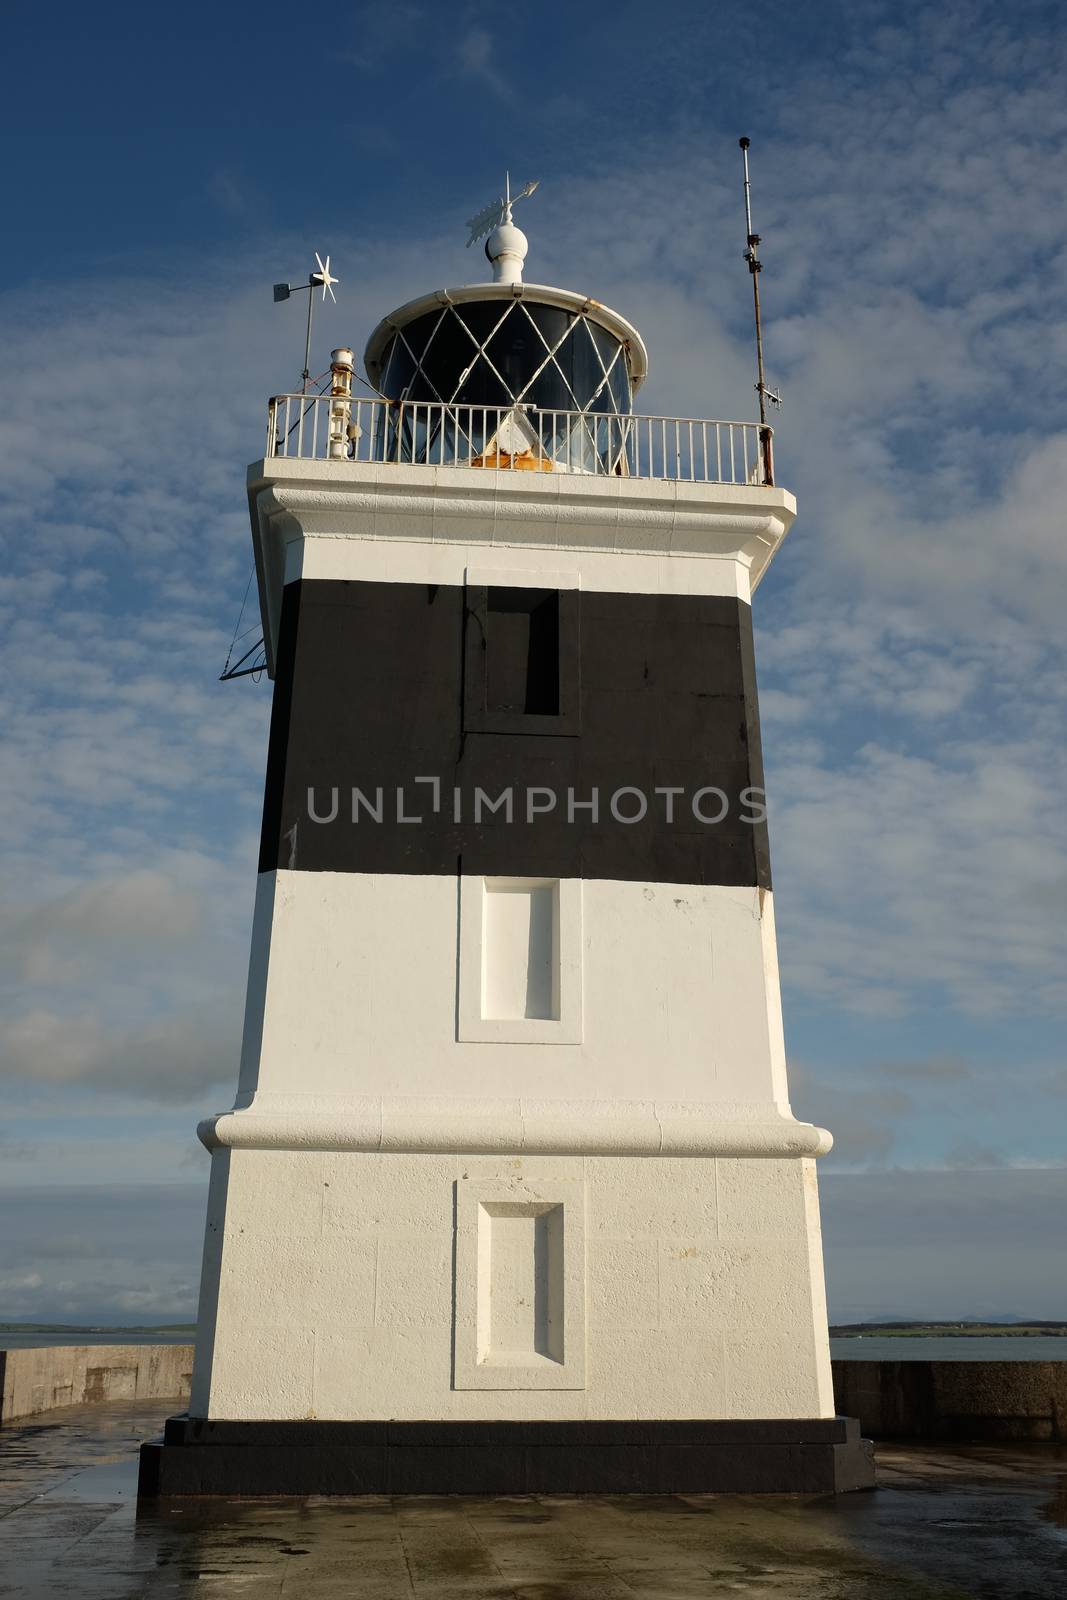 The lighthouse at the Holyhead breakwater, Anglesey, Wales, UK. Set against a blue sky with light cloud.